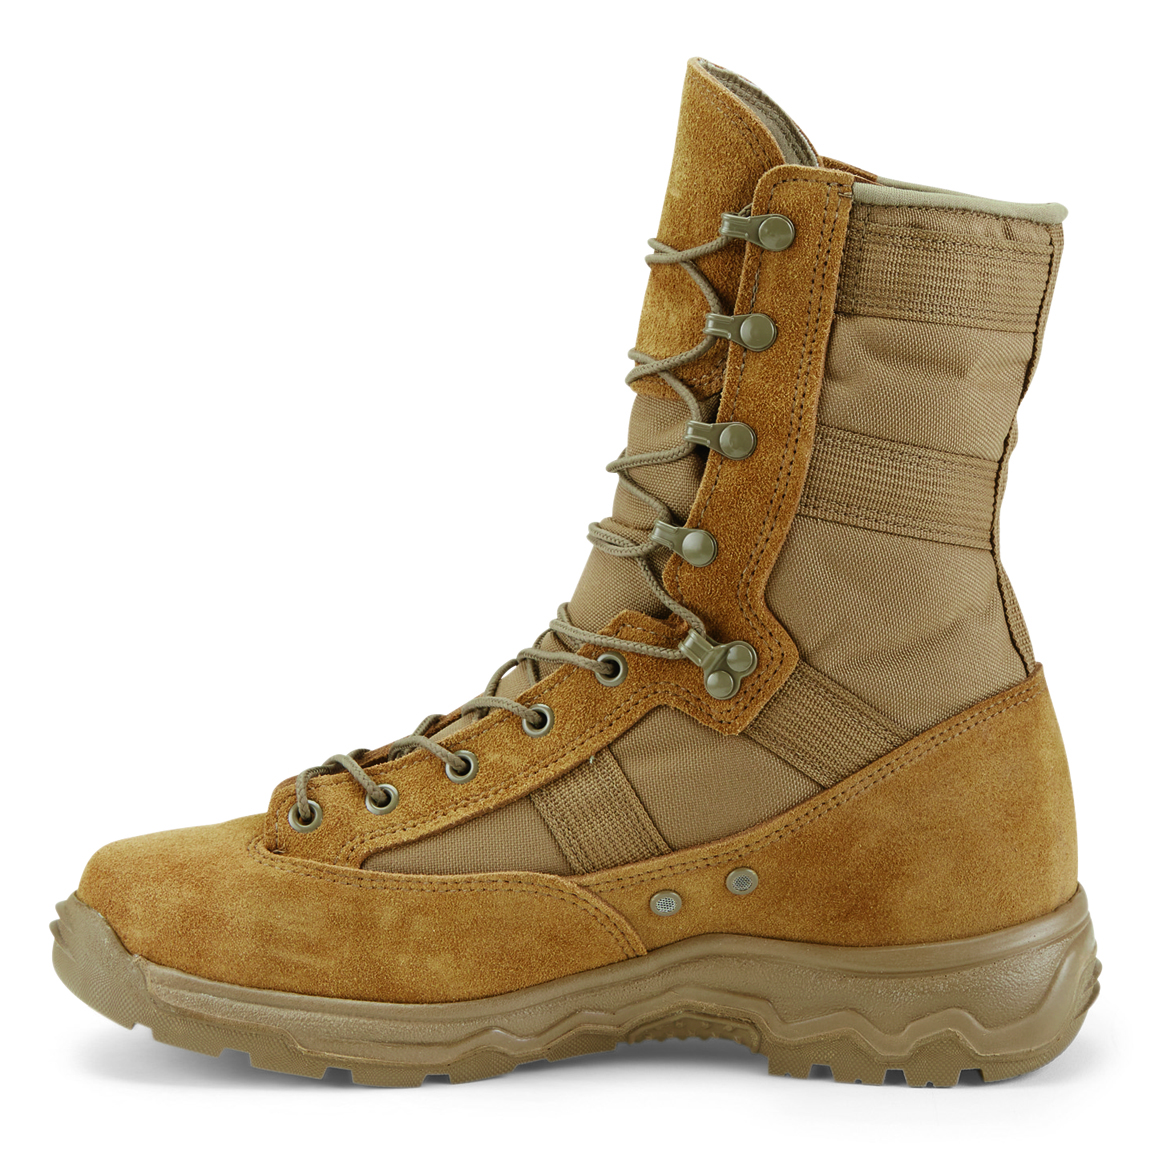 Suede and abrasion-resistant nylon upper, Coyote